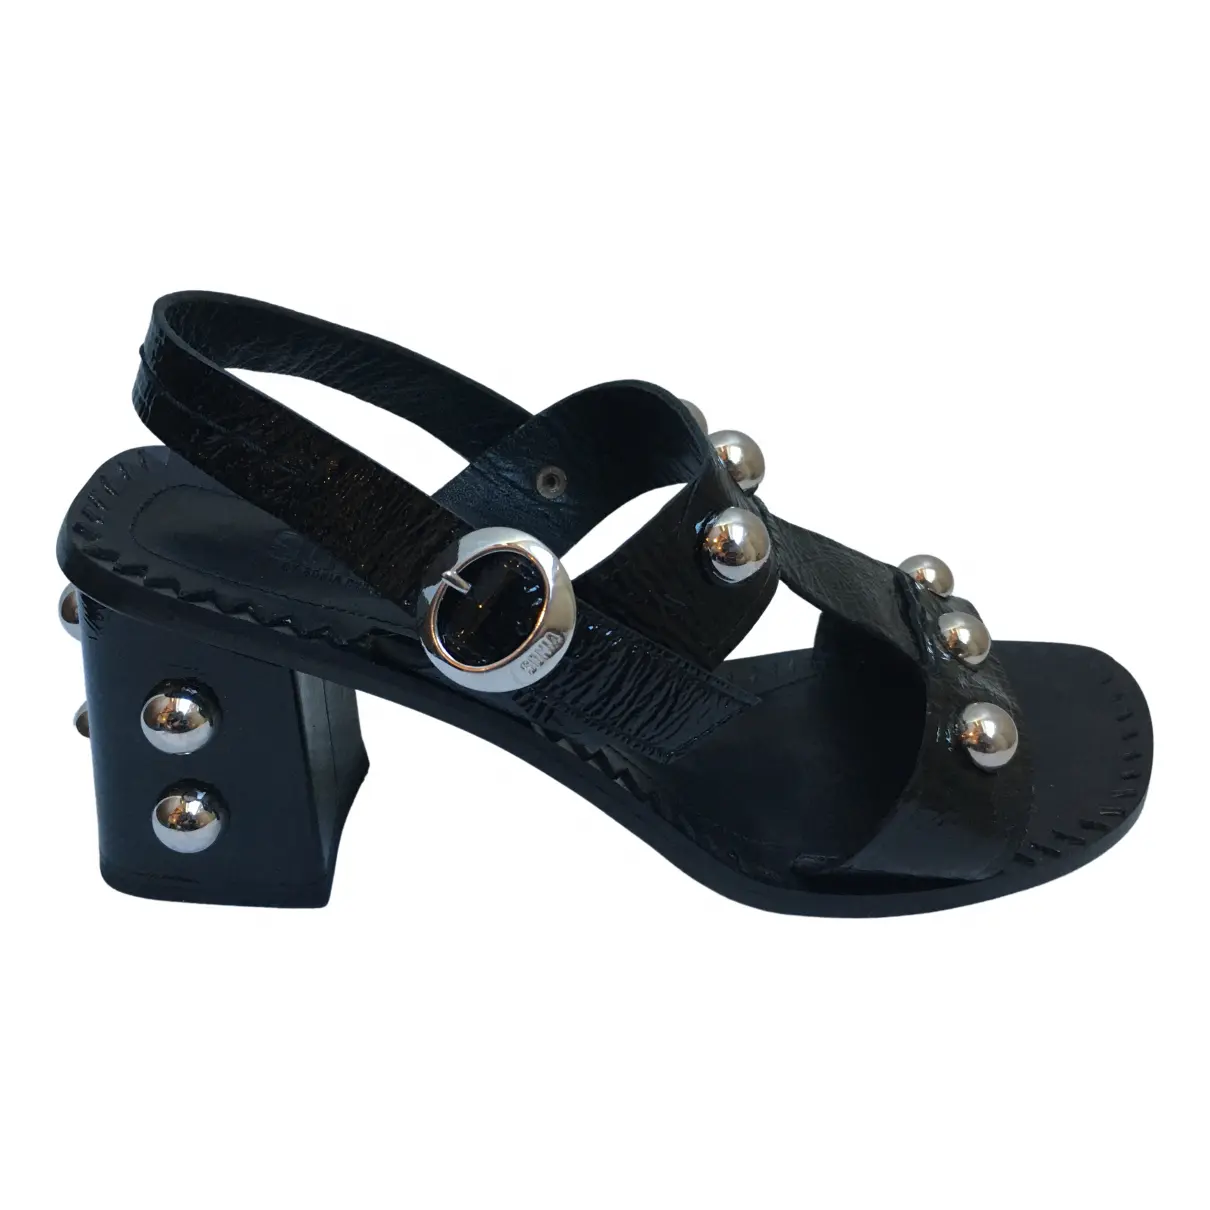 Patent leather sandals Sonia by Sonia Rykiel